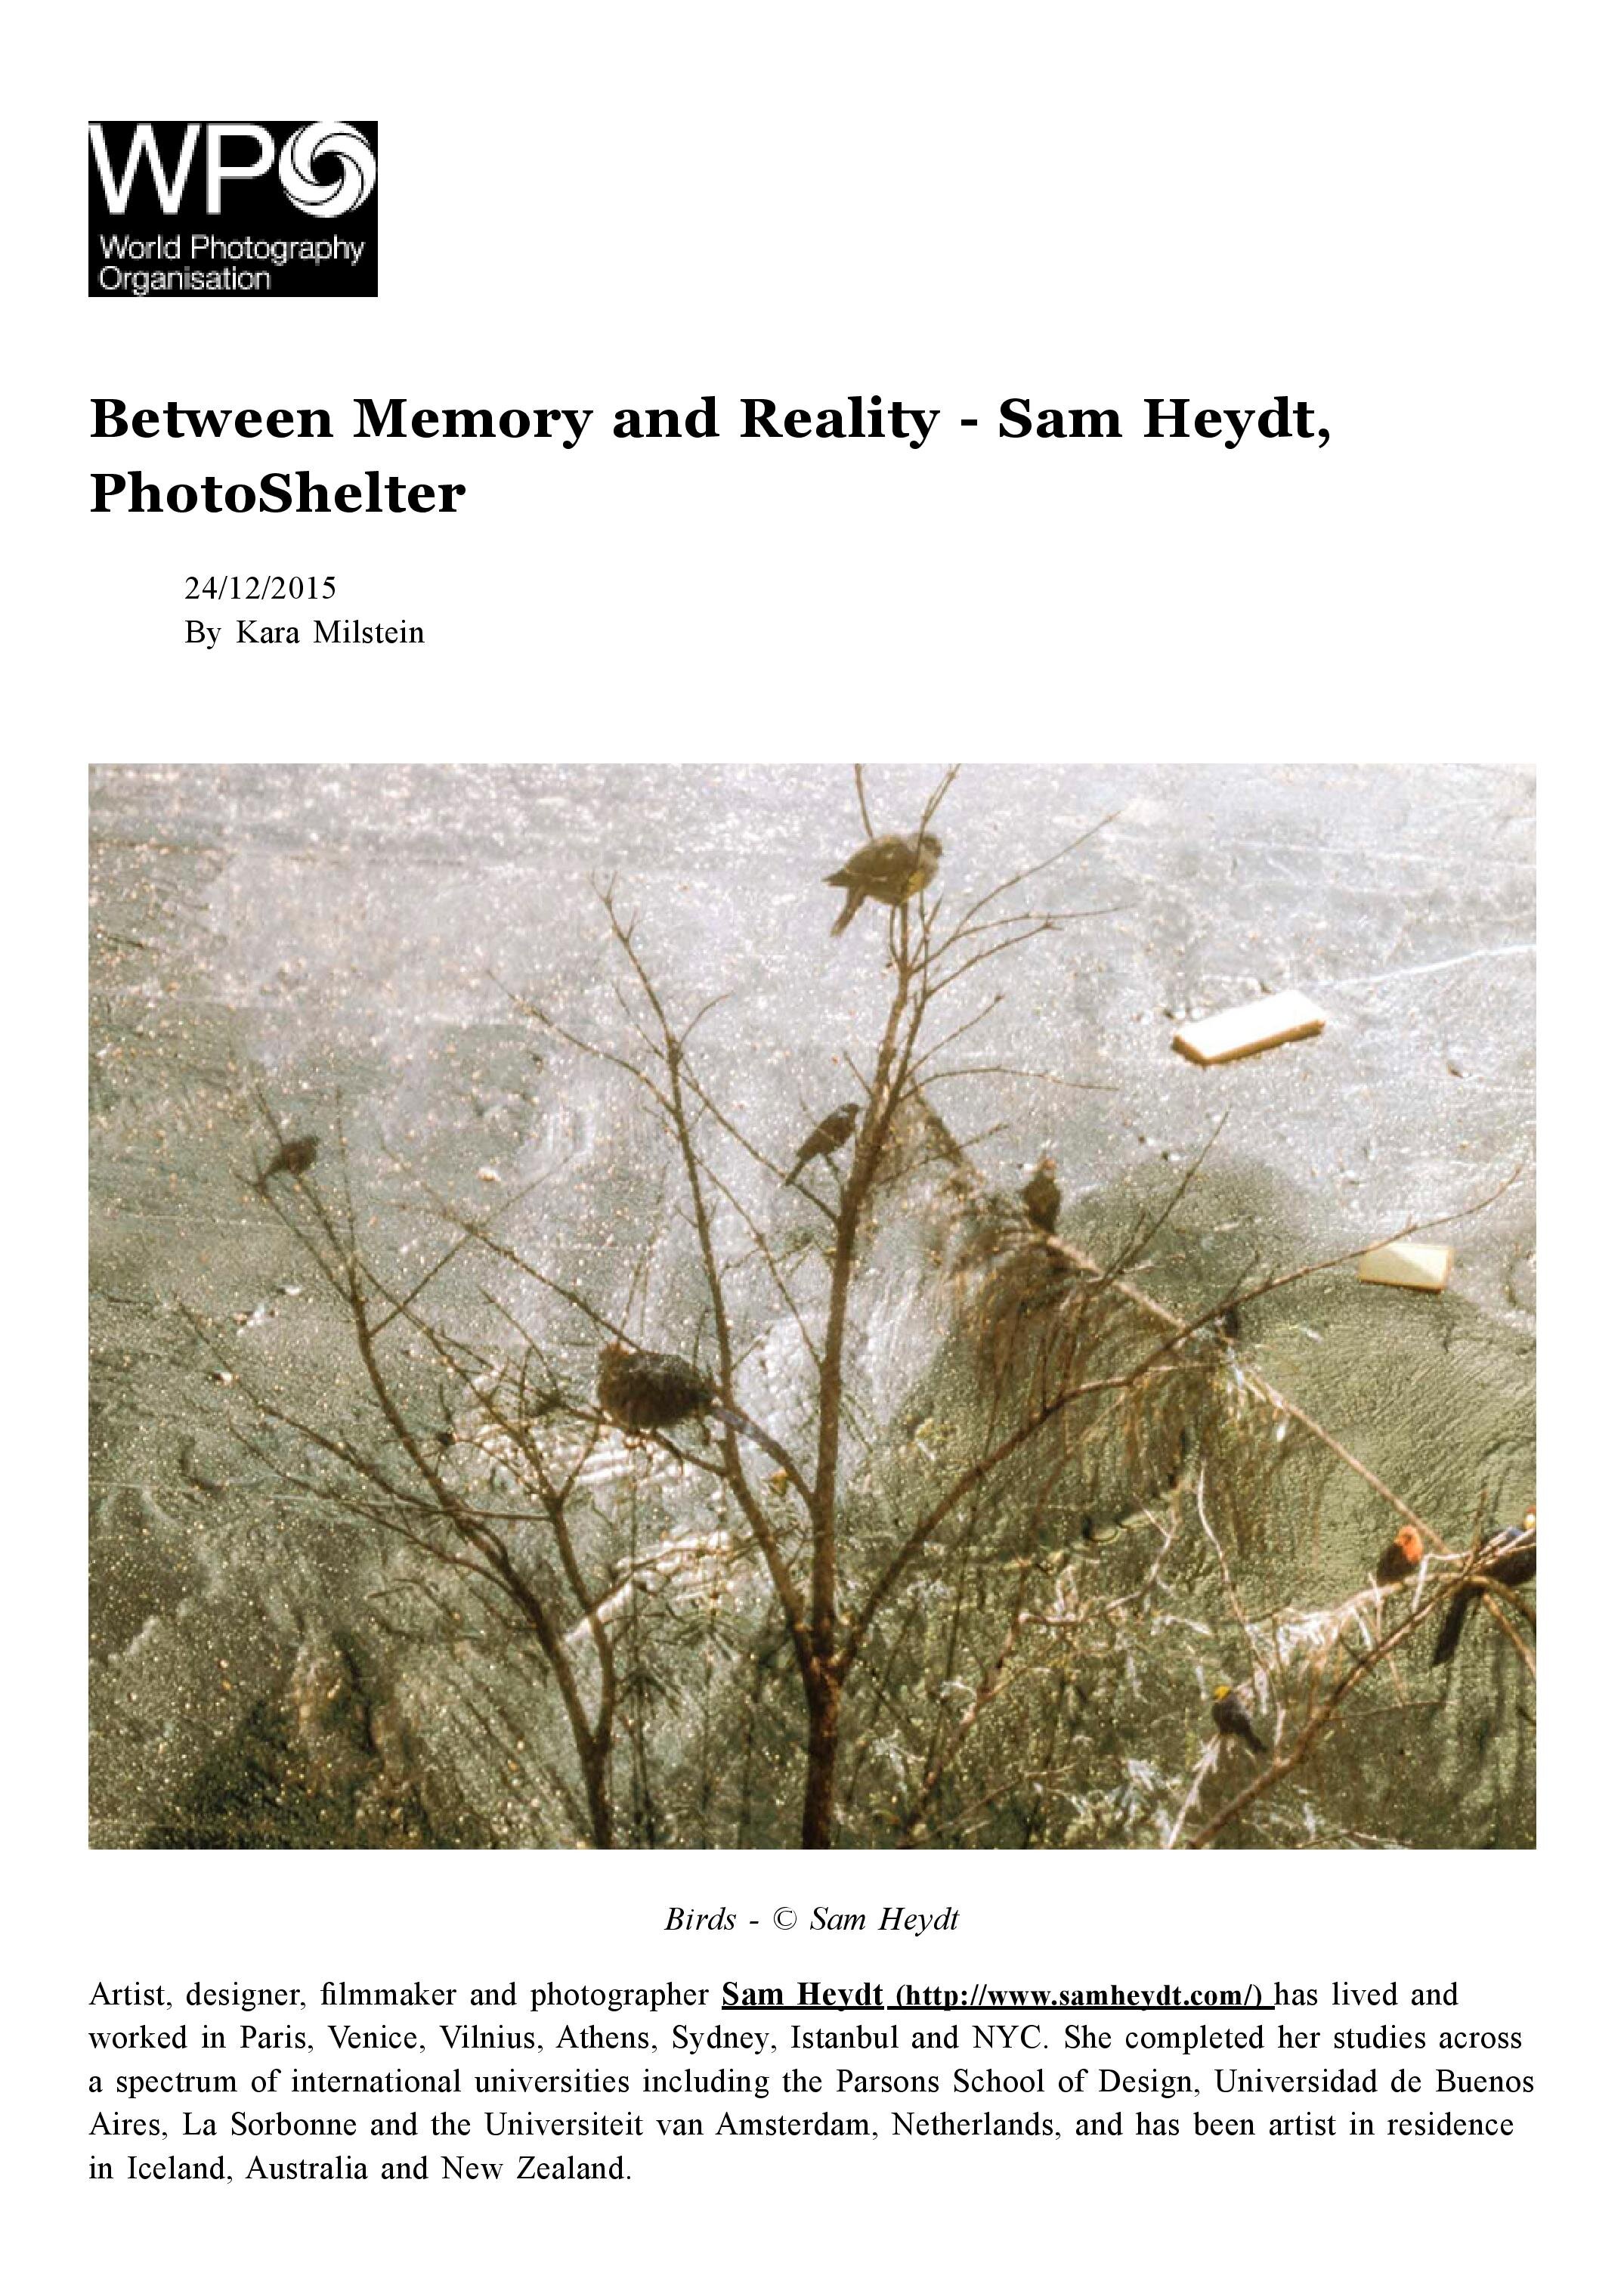 Between Memory and Reality - WPO-page-001.jpg